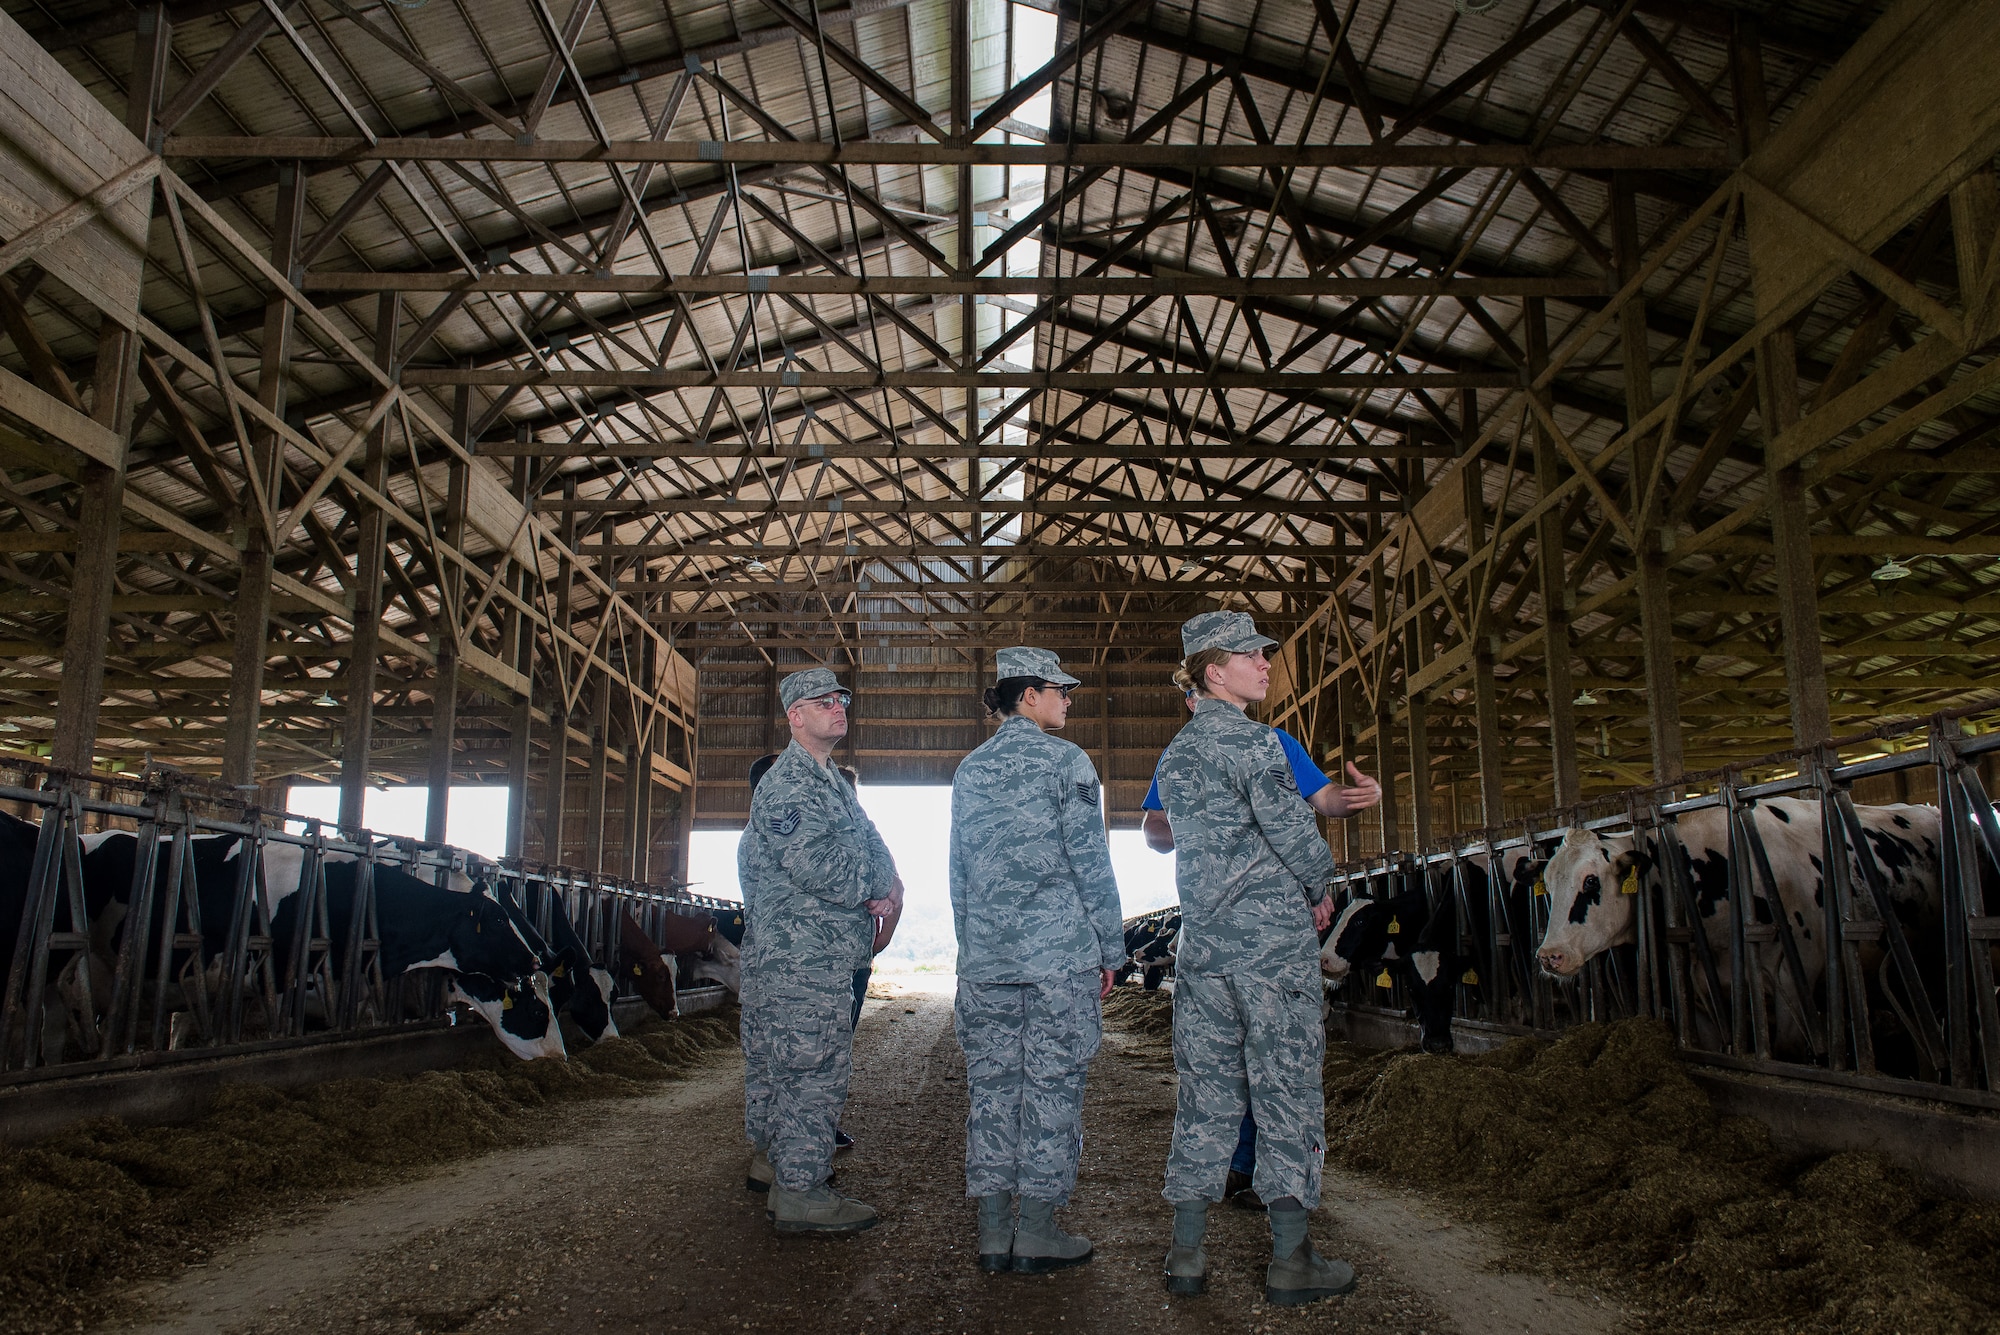 U.S. Air Force public health and bioenvironmental engineering specialists deployed in support of Delta Area Economic Opportunity Corporation Tri-State Innovative Readiness Training 2019 visit a dairy farm in Perryville, Mo., June 18, 2019. The Airmen coordinated with civilian public health agency partners to view livestock processes and promote interagency cooperation. (U.S. Air National Guard photo by Senior Airman Jonathan W. Padish)